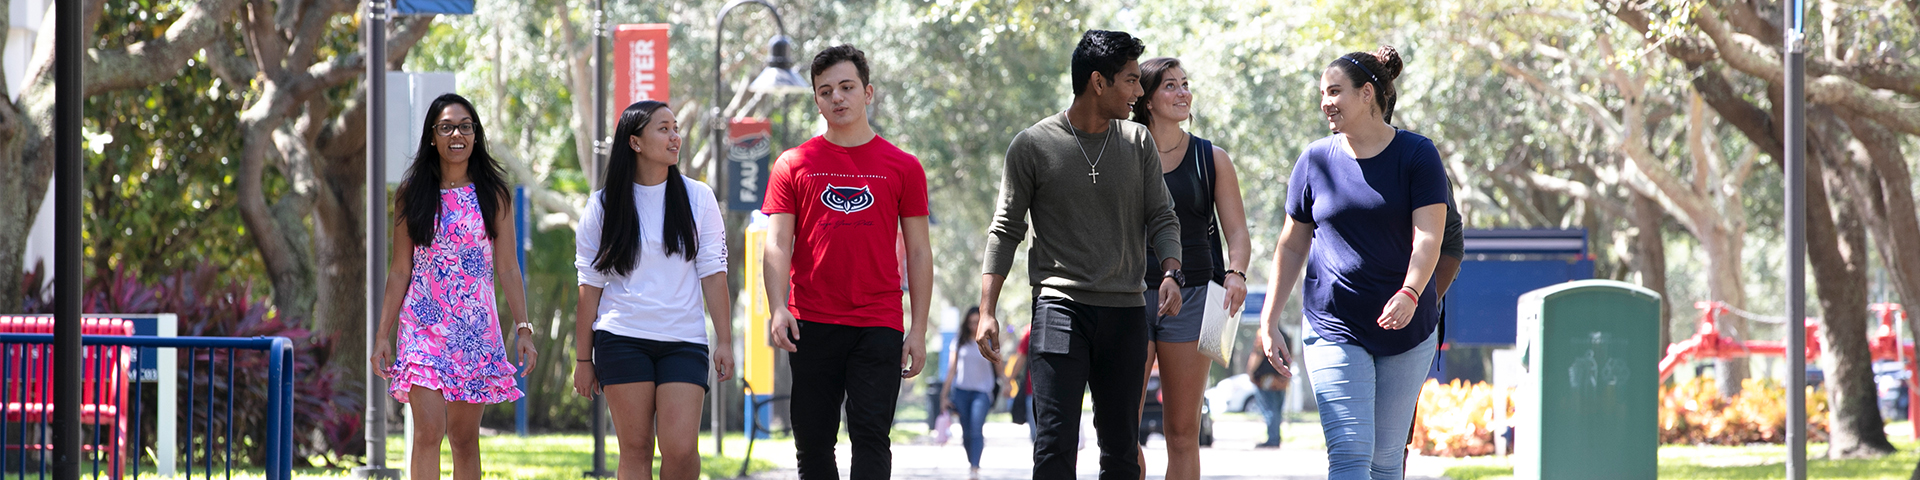 Students walking across the Jupiter campus under trees